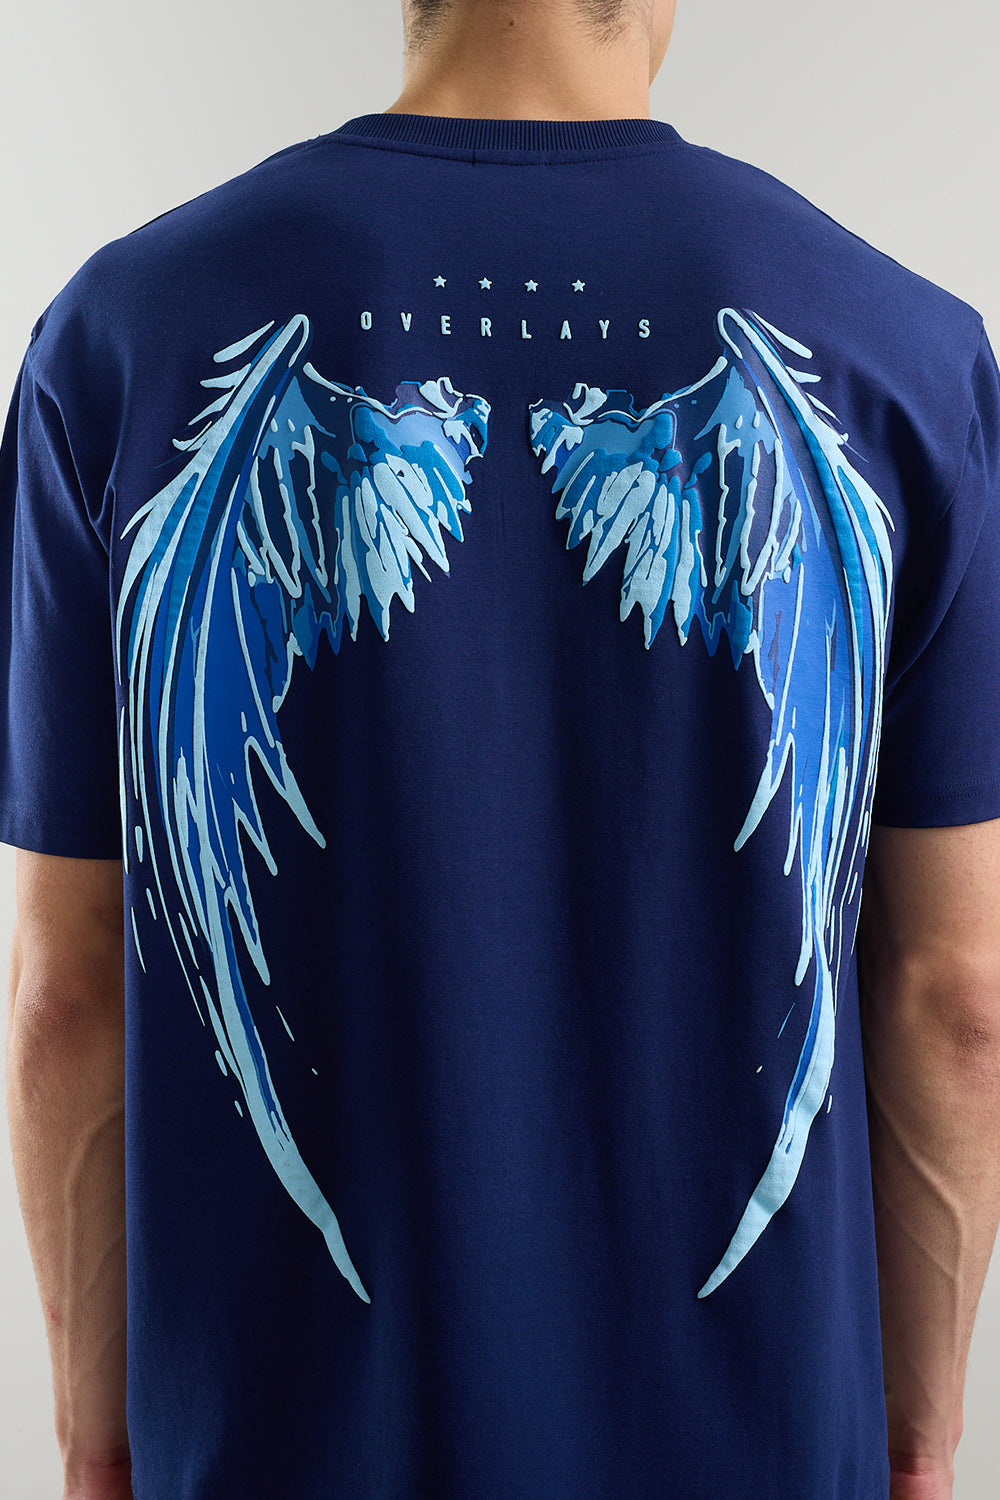 Guardian Wings Relaxed Fit T-shirt - Ultra Soft